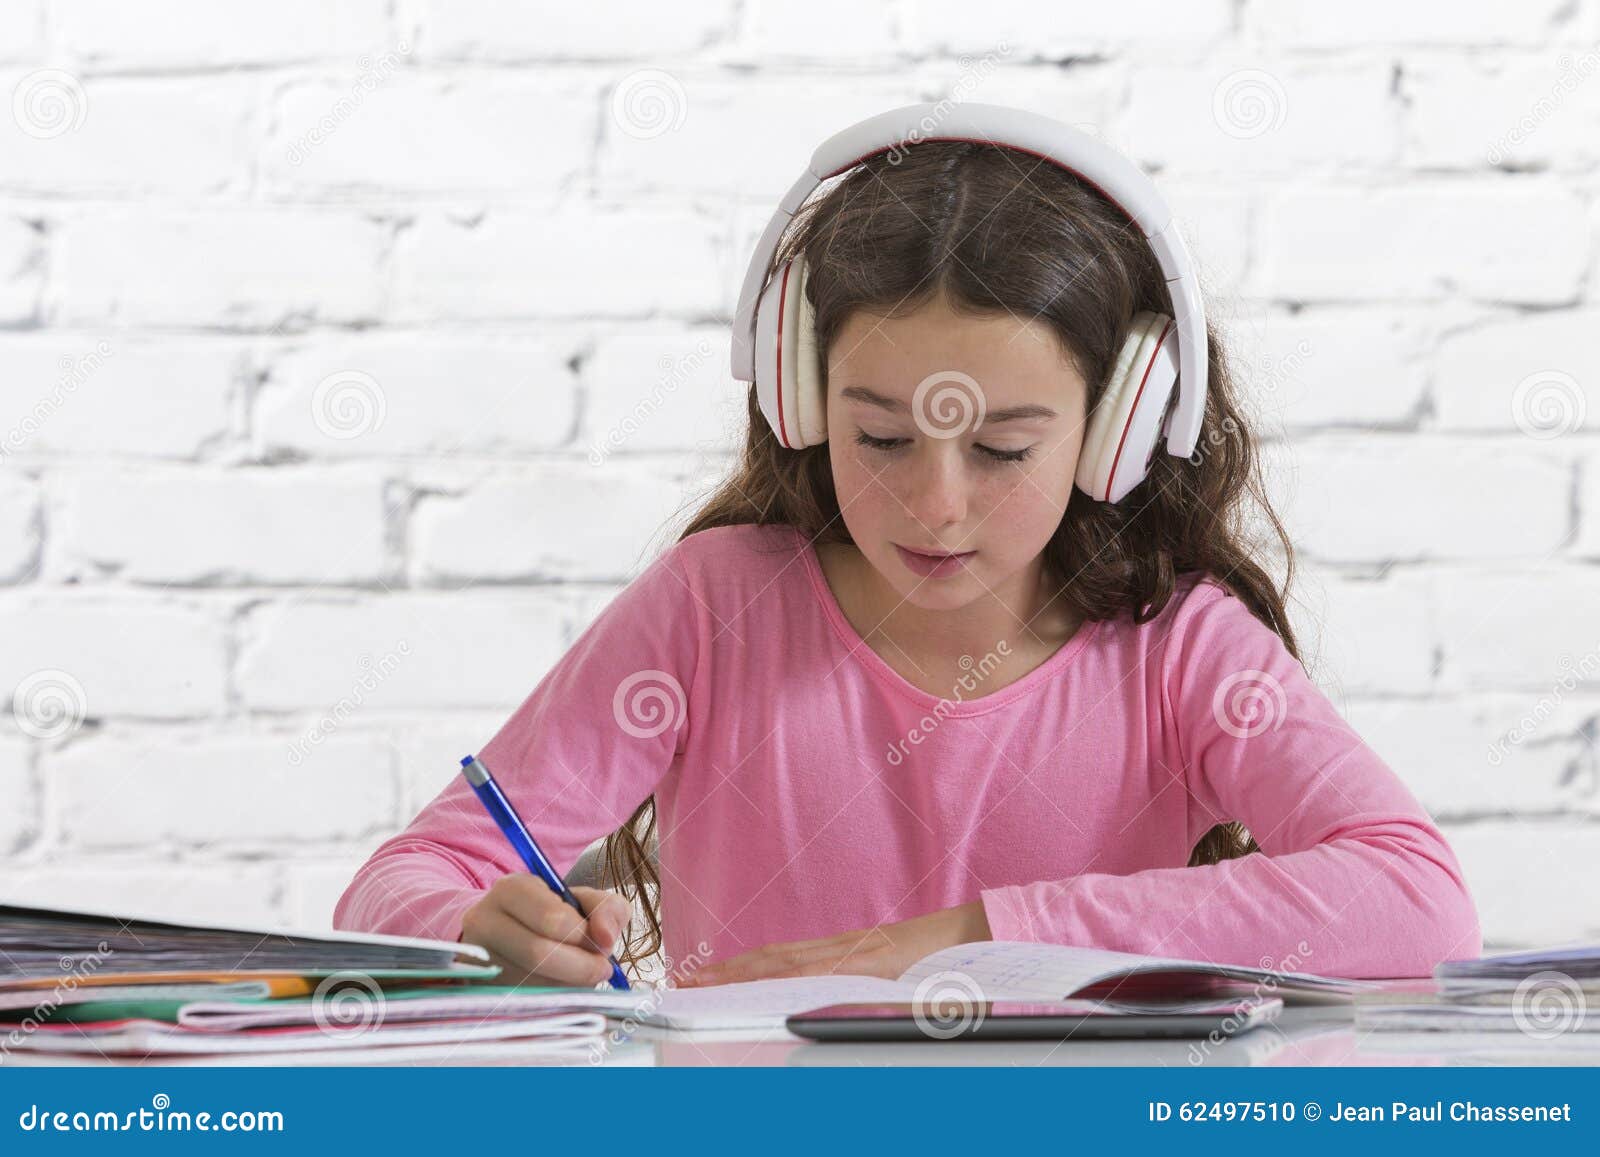 listening to music while doing homework